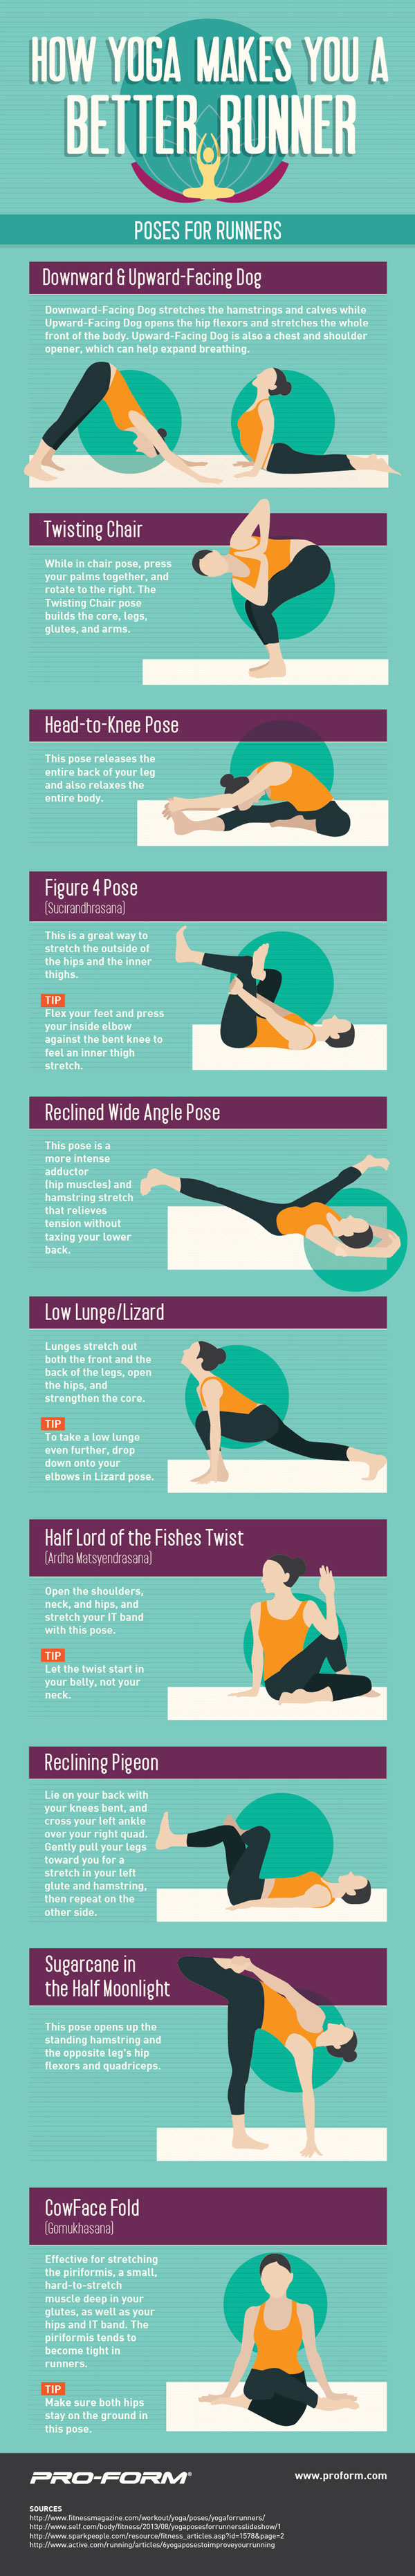 How Yoga Makes You a Better Runner [Infographic] - Best Infographics